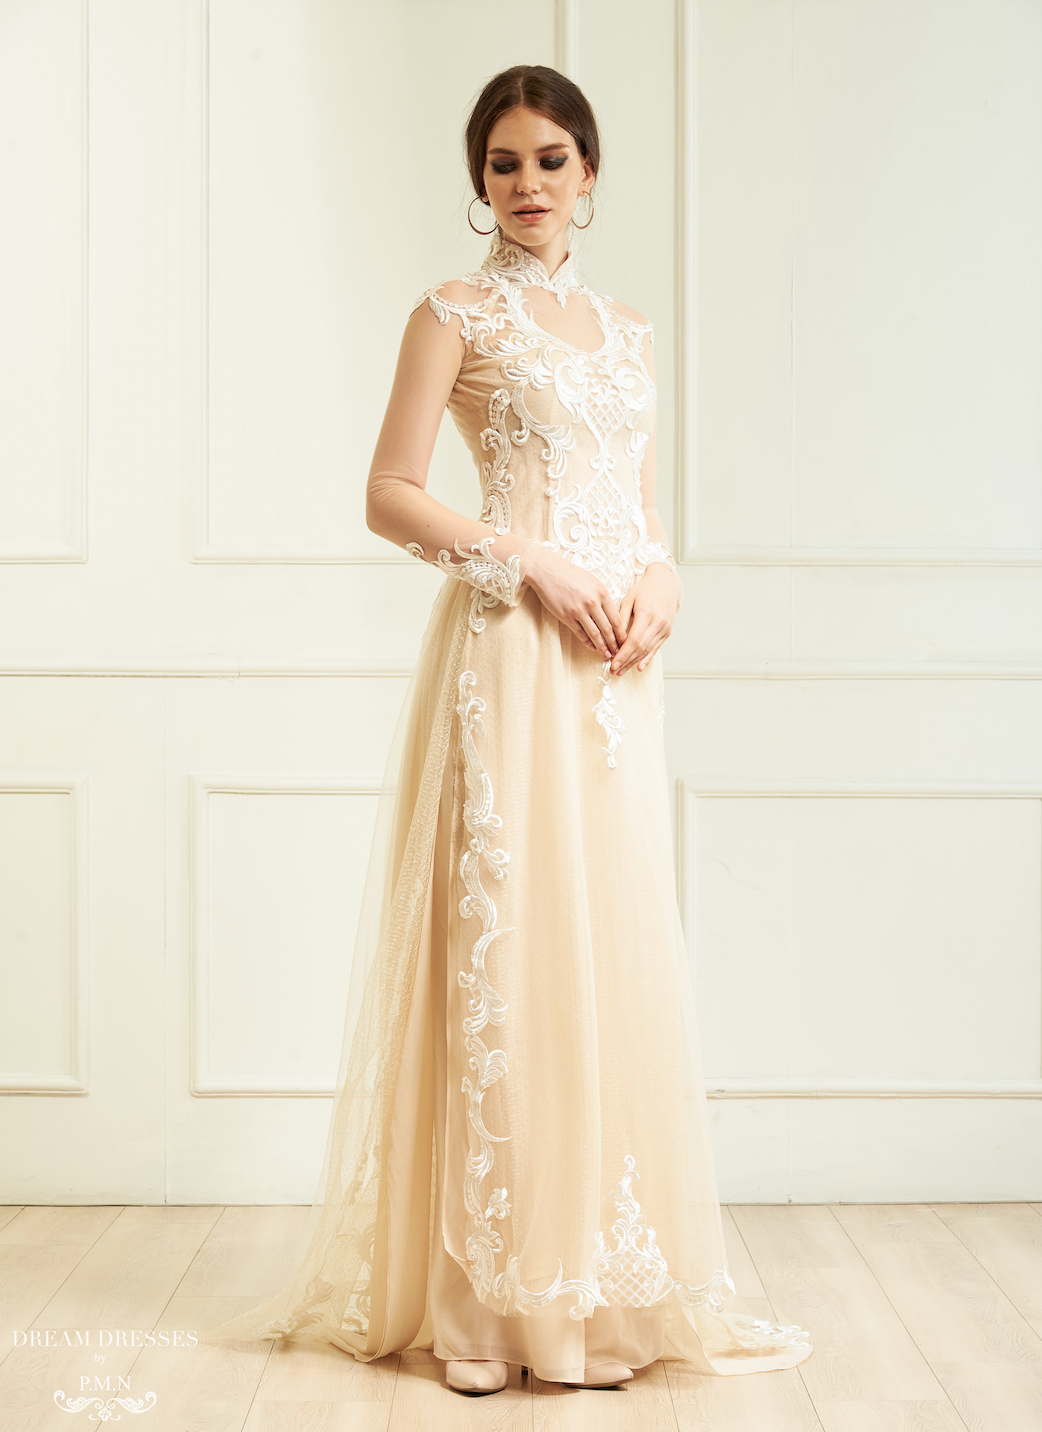 Dream Dresses by P.M.N. White Bridal AO Dai | Vietnamese Traditional Bridal Dress with Gold Lace (#JIAYI) 16